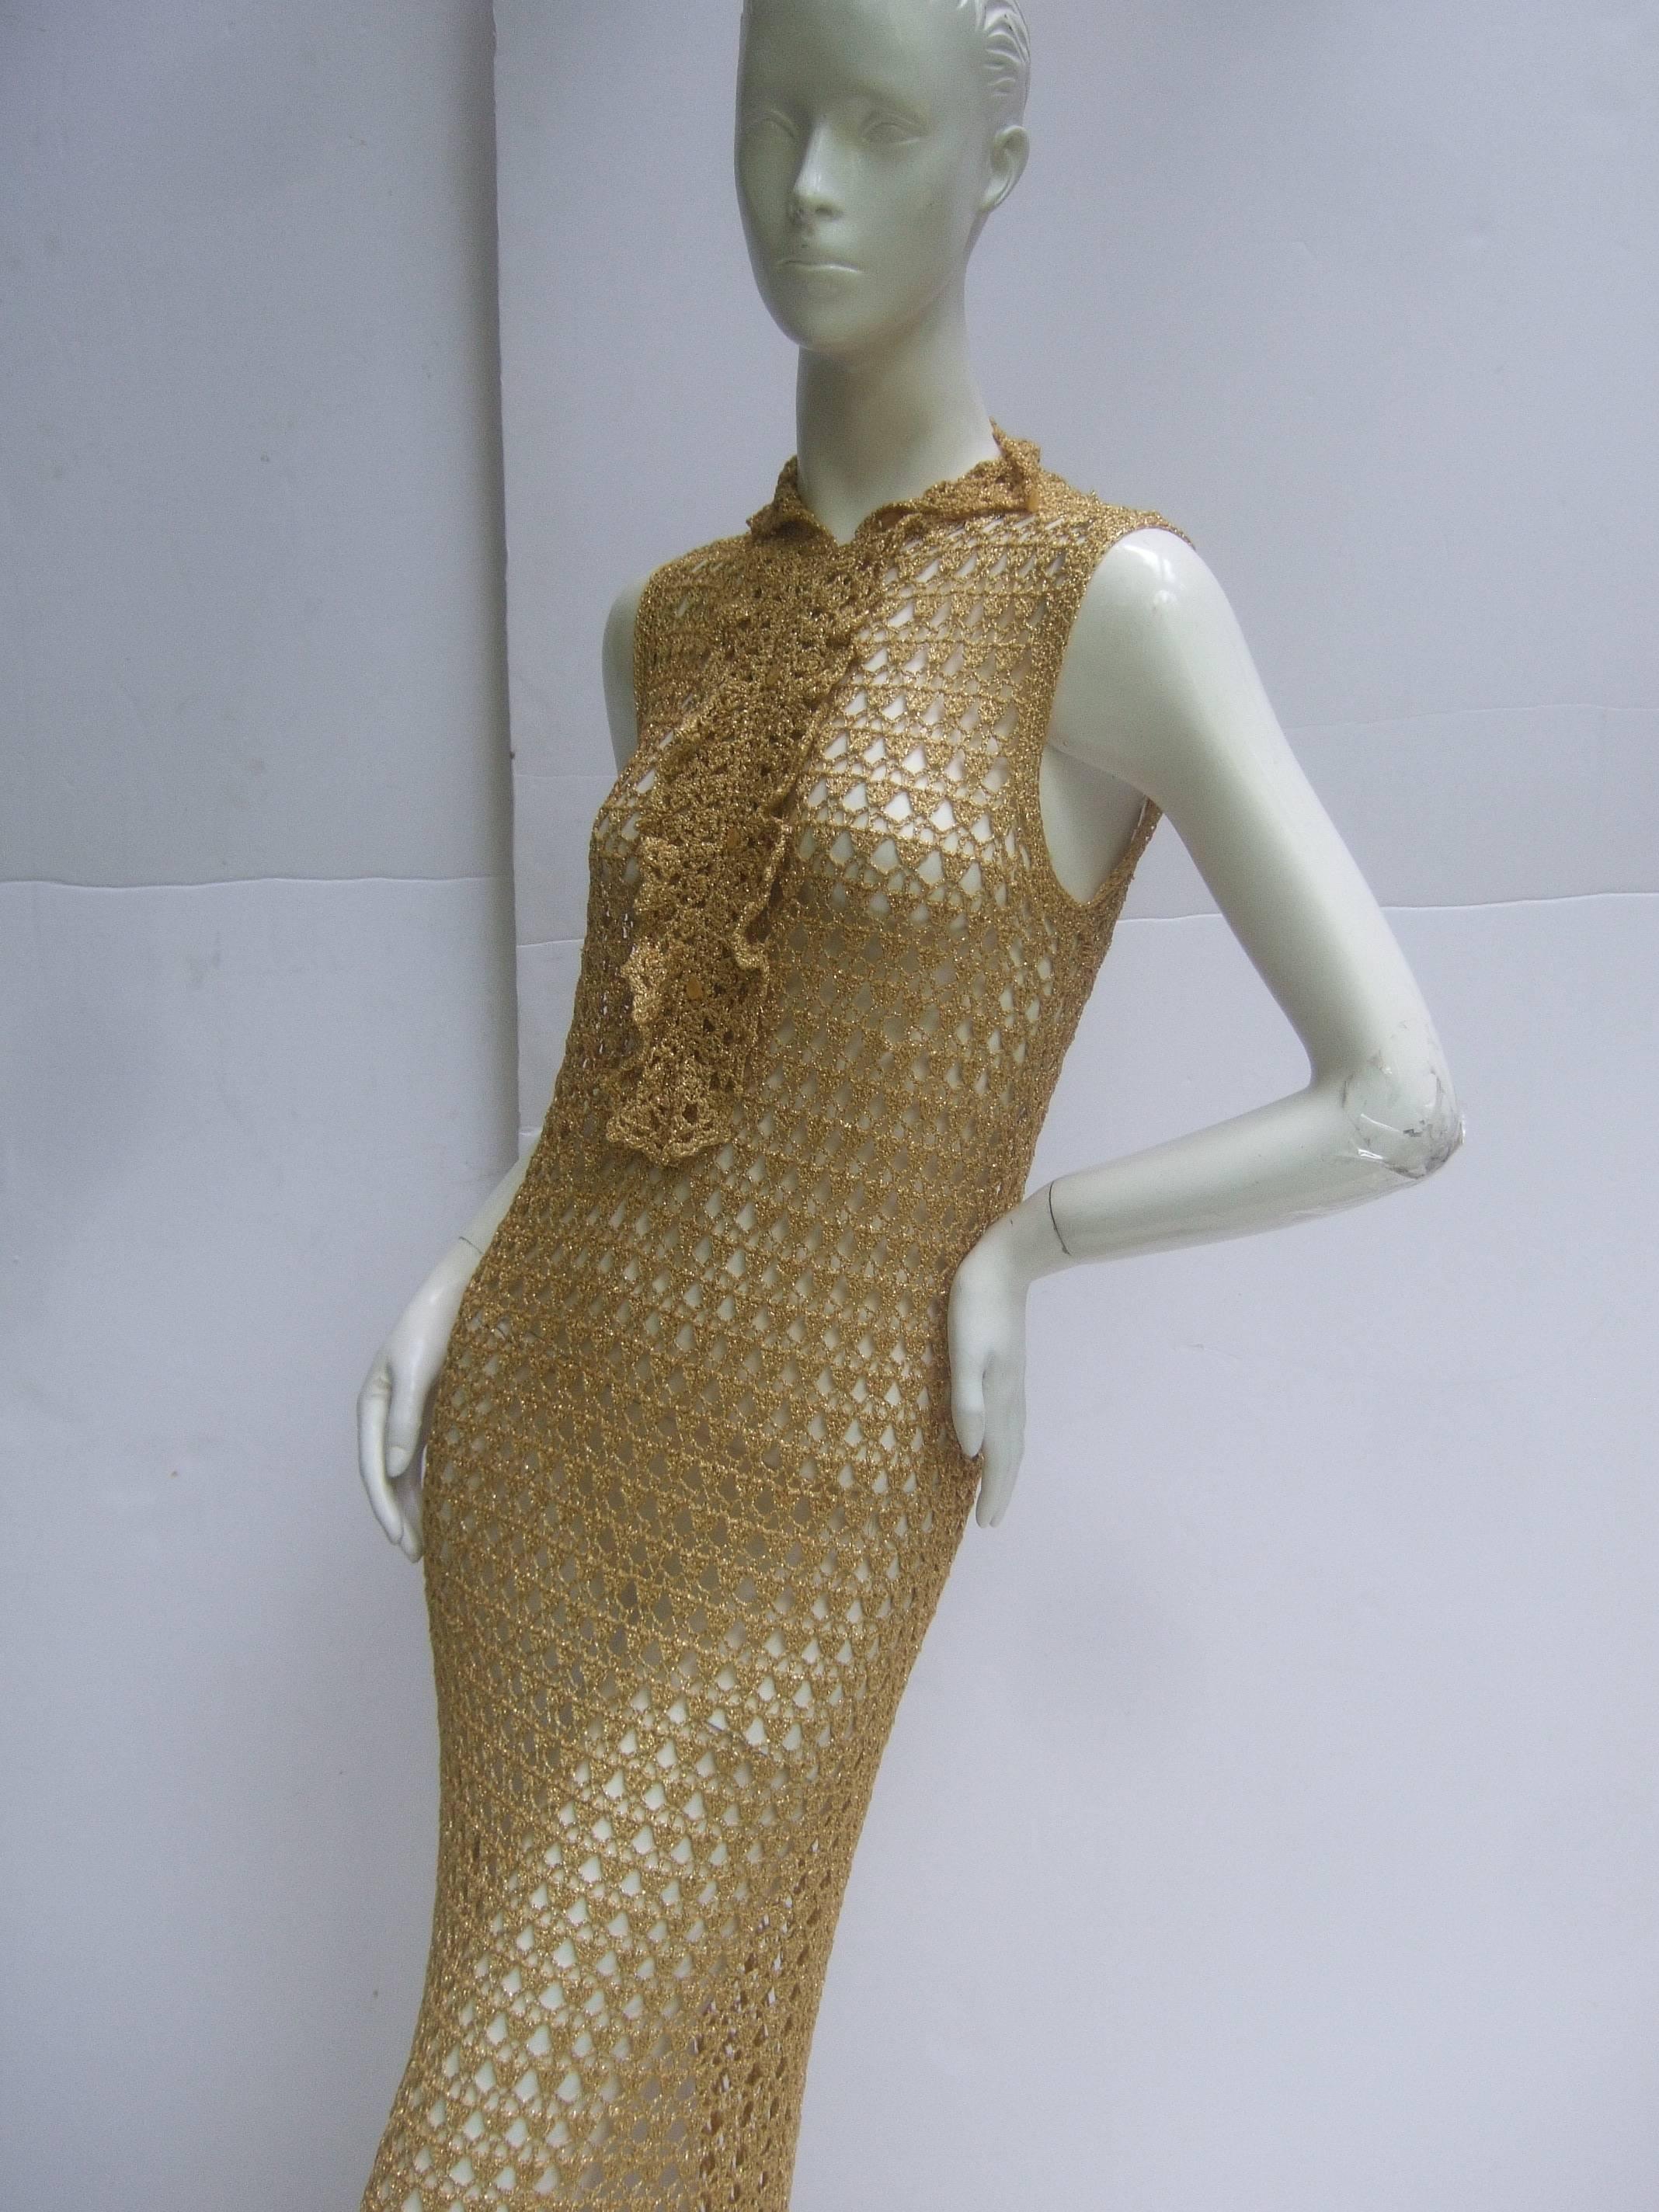 Incredible 1960's gold metallic crochet gown. Curvaceous, slinky cut.
Ruffles at the neck, flattering flared hemline. Made of soft gold metallic crochet
thread.  Unlabelled. Very good condition. Length: 72